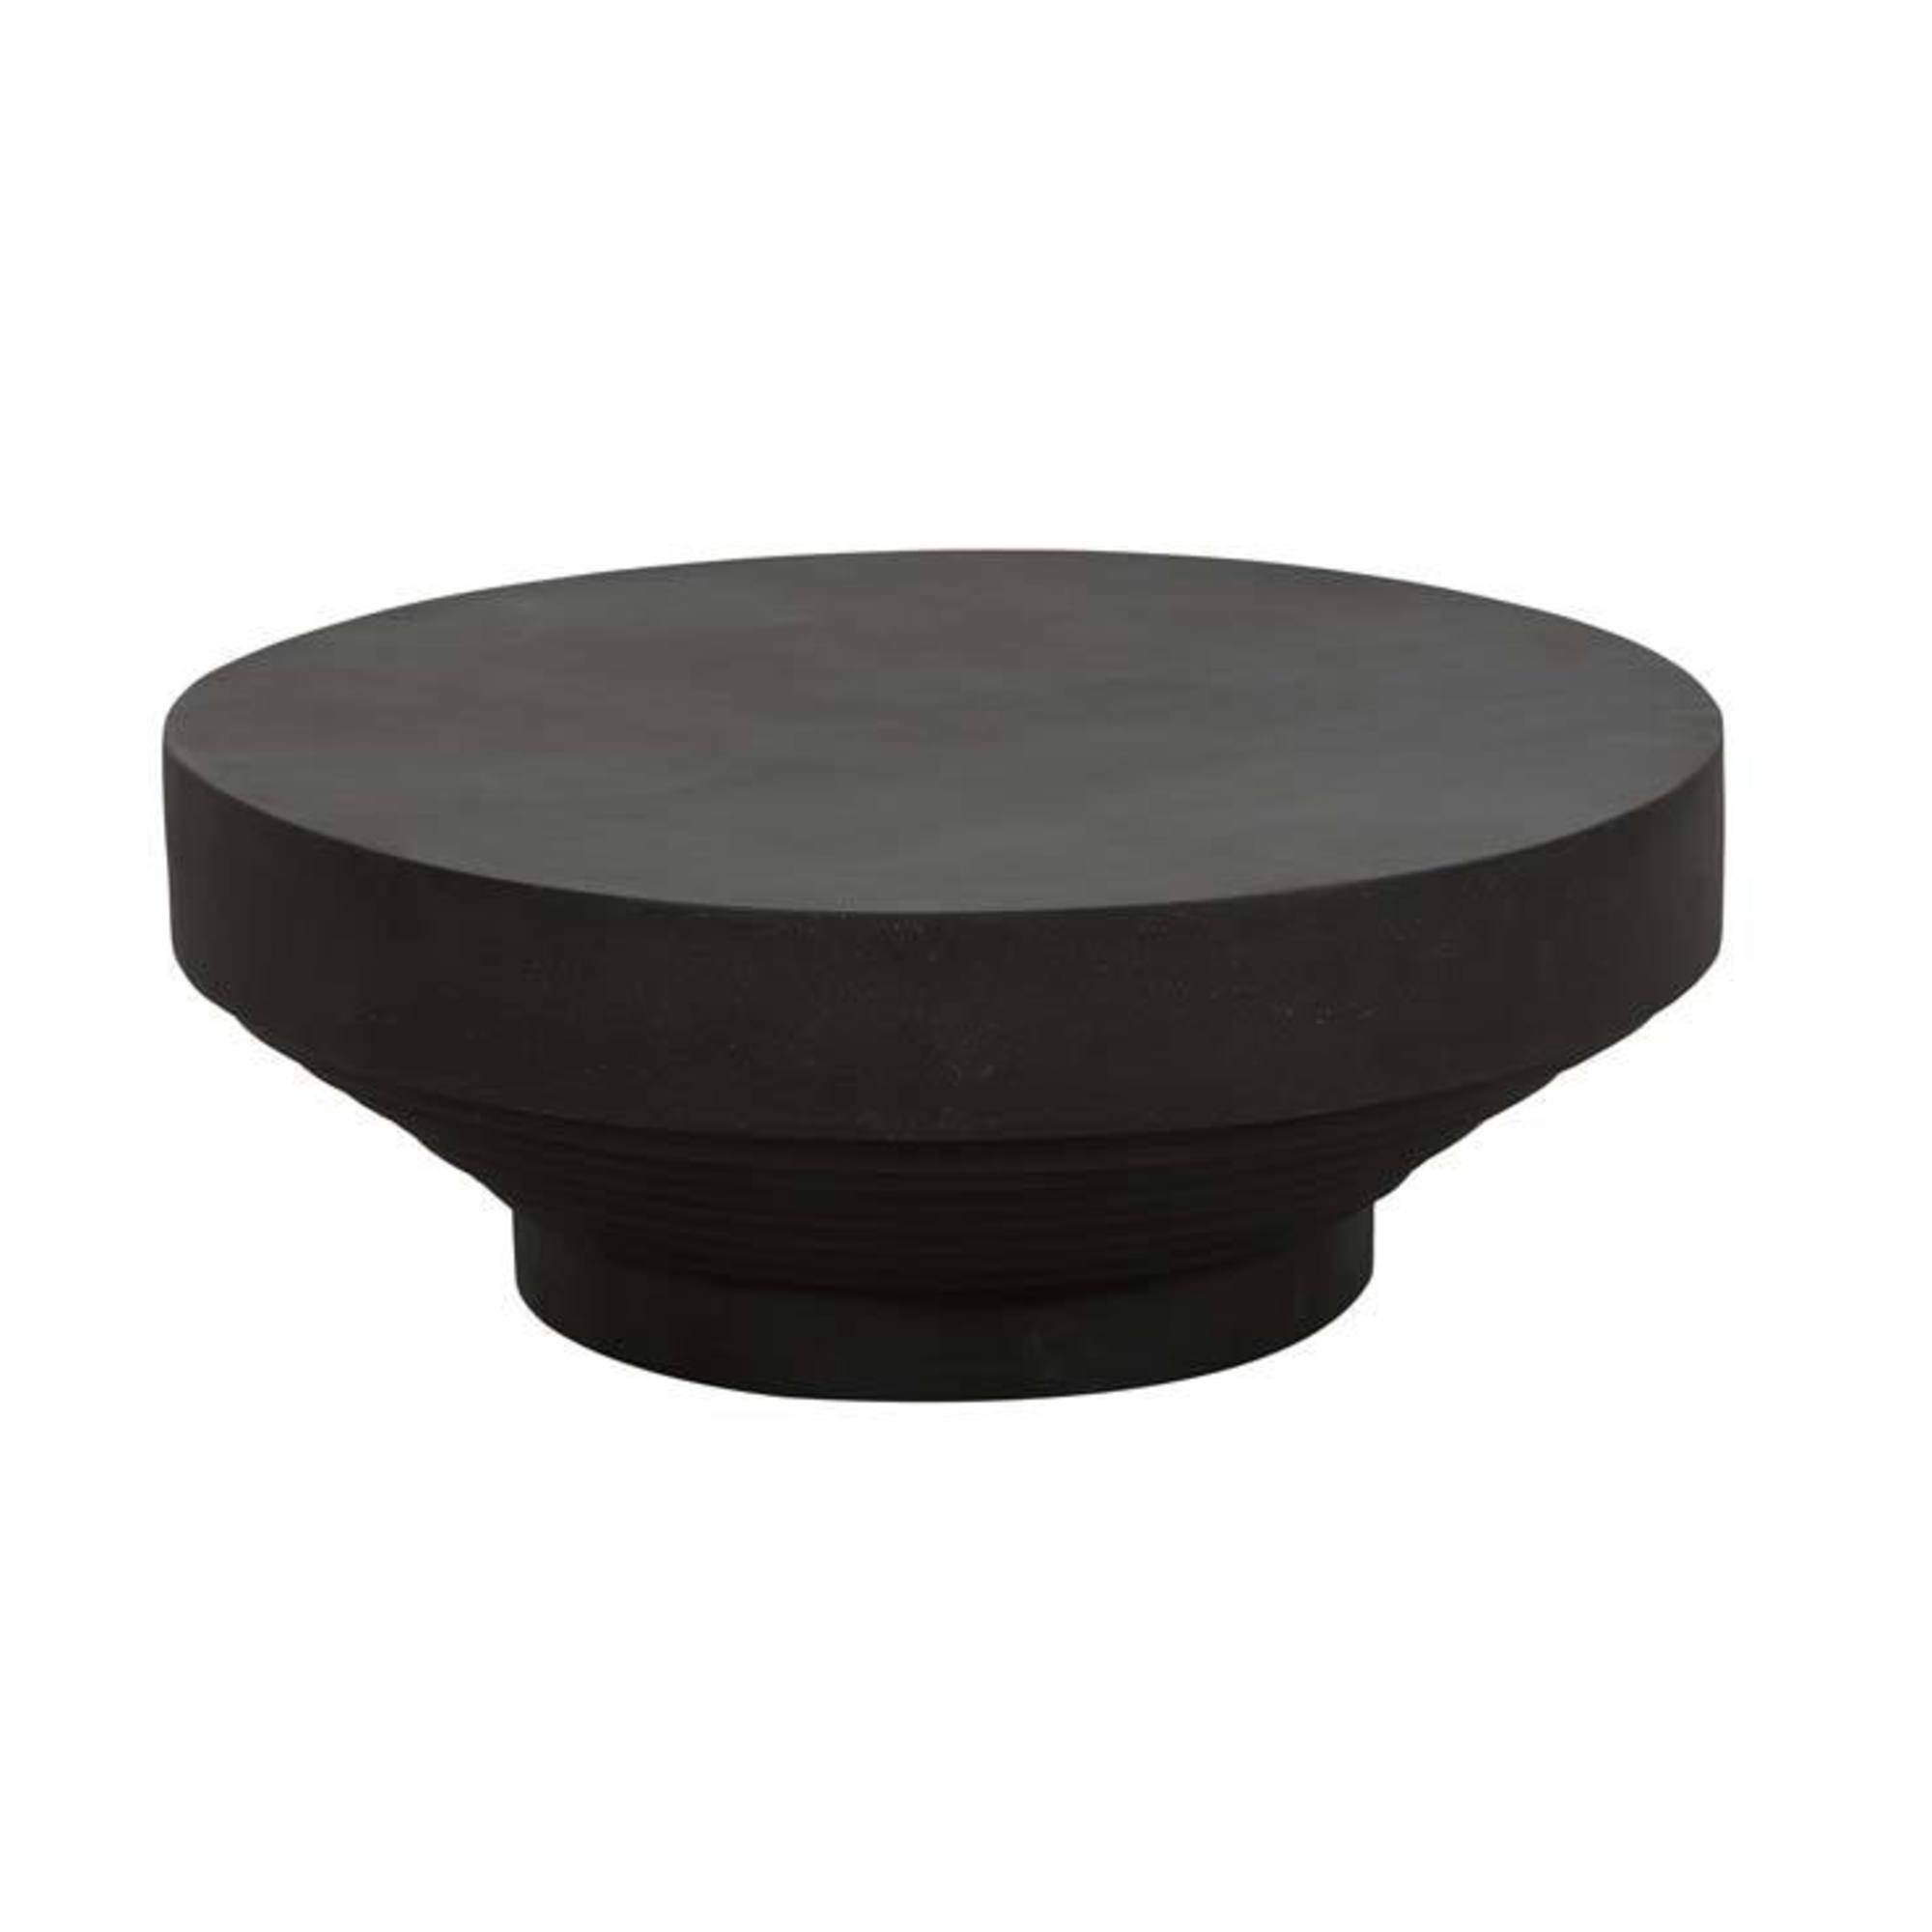 Mauritius Drum Coffee Table (Outdoor) image 9